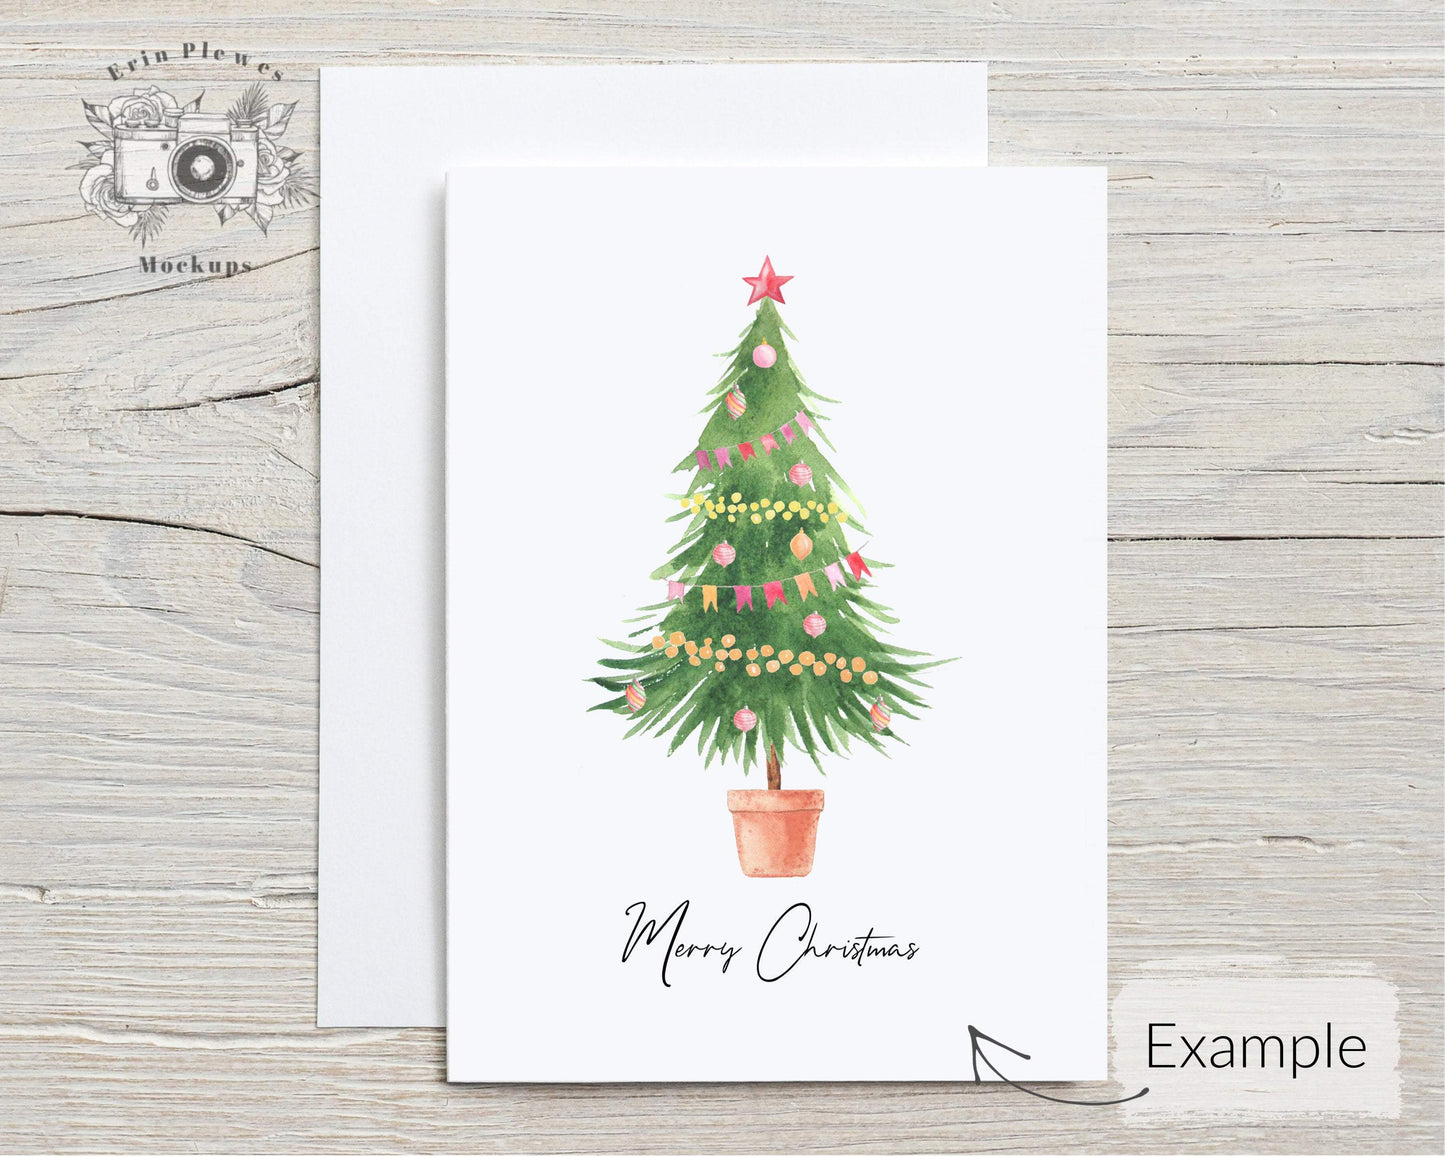 Erin Plewes Mockups A6 Greeting card mockup with white envelope, Thank you card mock-up size A 6 for rustic wedding invitation, Jpeg Instant Digital Download